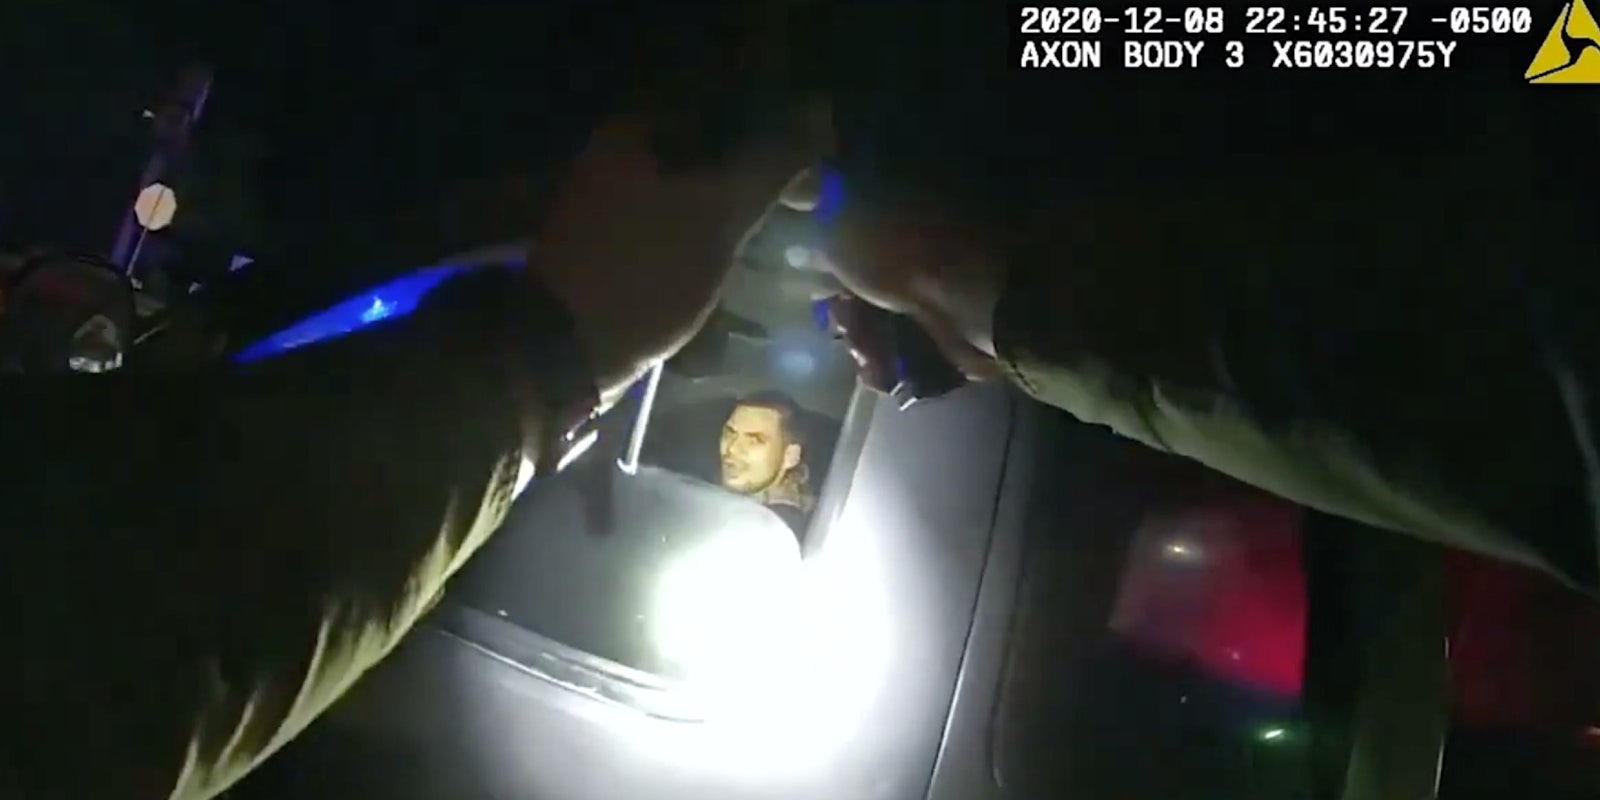 Dylan Scott inside a car while a Hillsborough County deputy pleads with him to comply